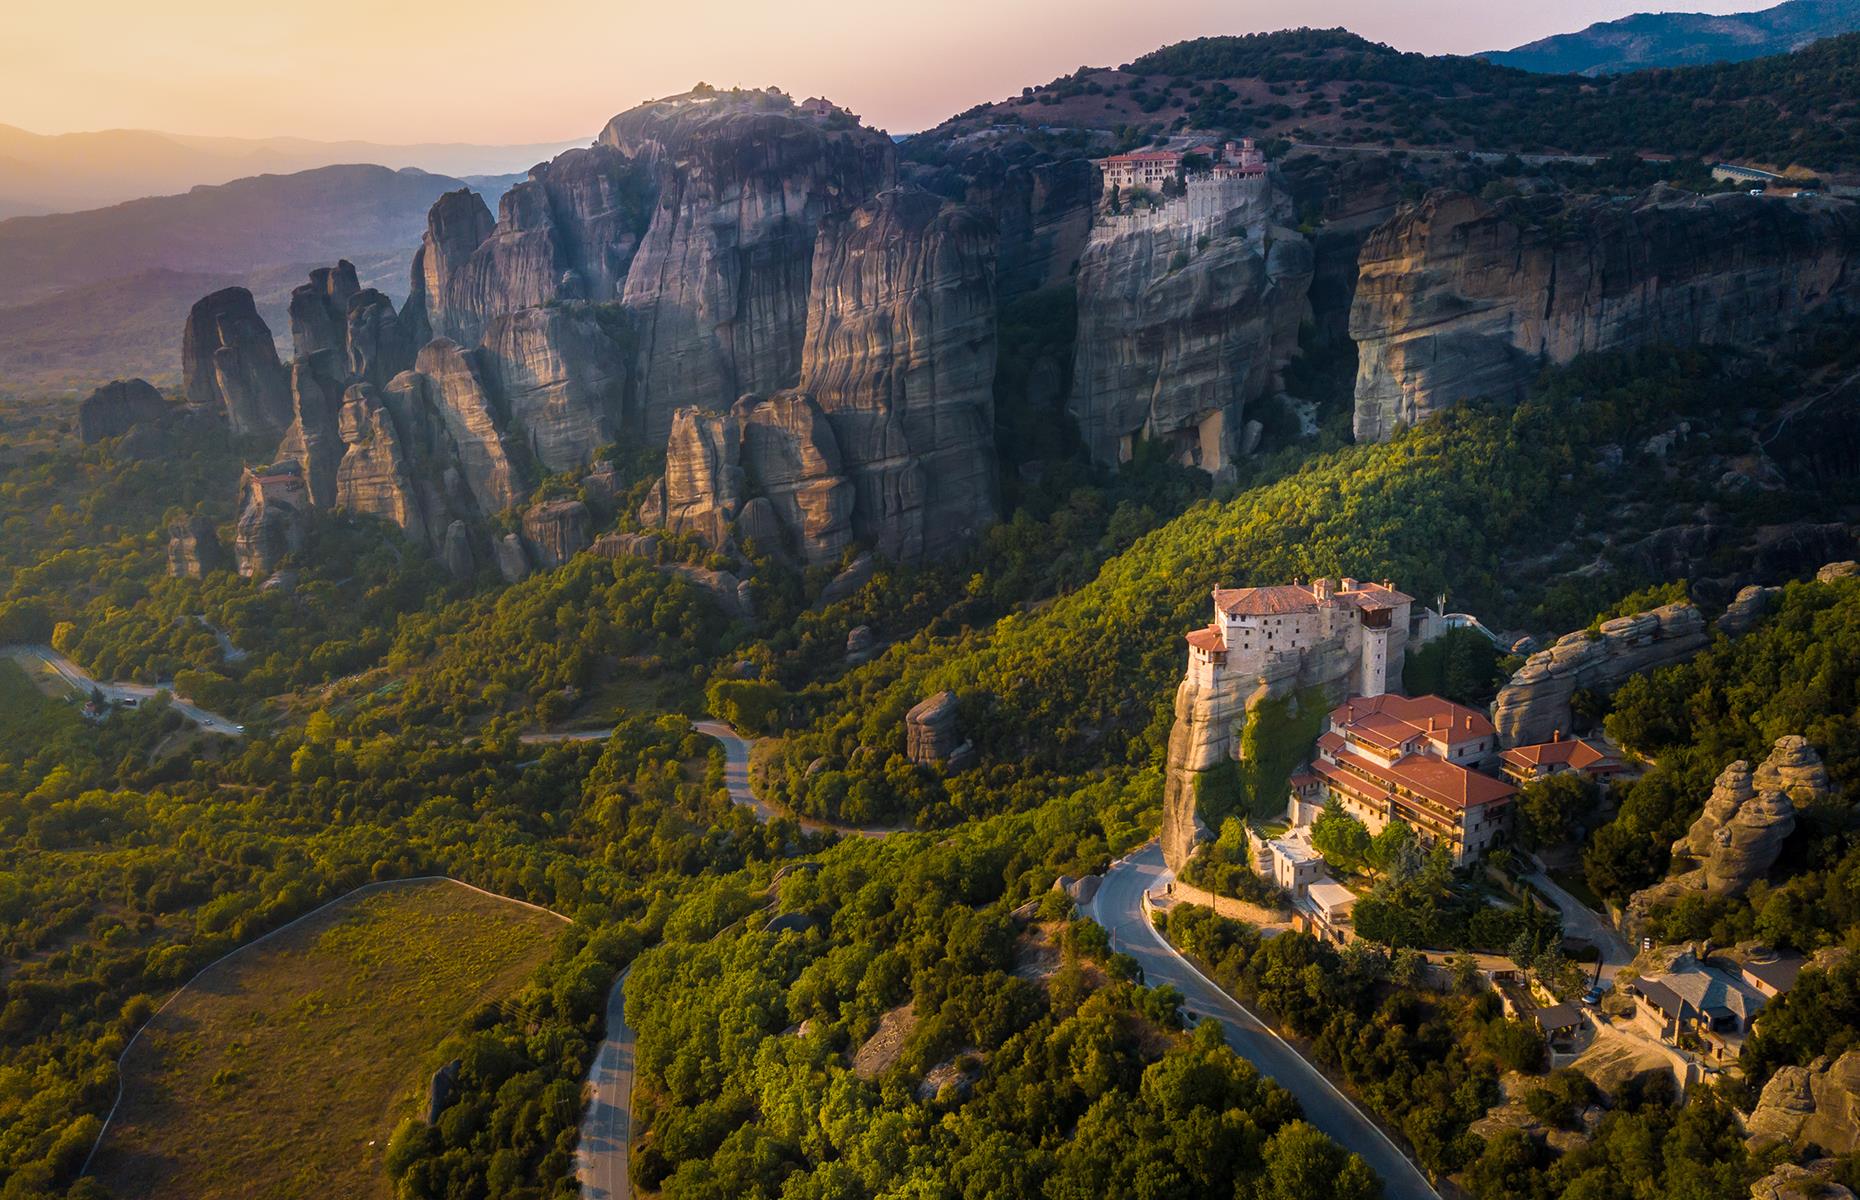 <p>An astonishing landscape of towering rock formations topped with precariously perched monasteries, Meteora is a magical place for a hot air balloon ride. Taking off from an open field, you'll climb gracefully before gliding over the enormous natural pillars, where monks have lived in monasteries on the cliff edges since the 14th century. Only from this vantage point can you really appreciate the determination and strength it took to create such communities atop Meteora's enormous plinths all those years ago.</p>